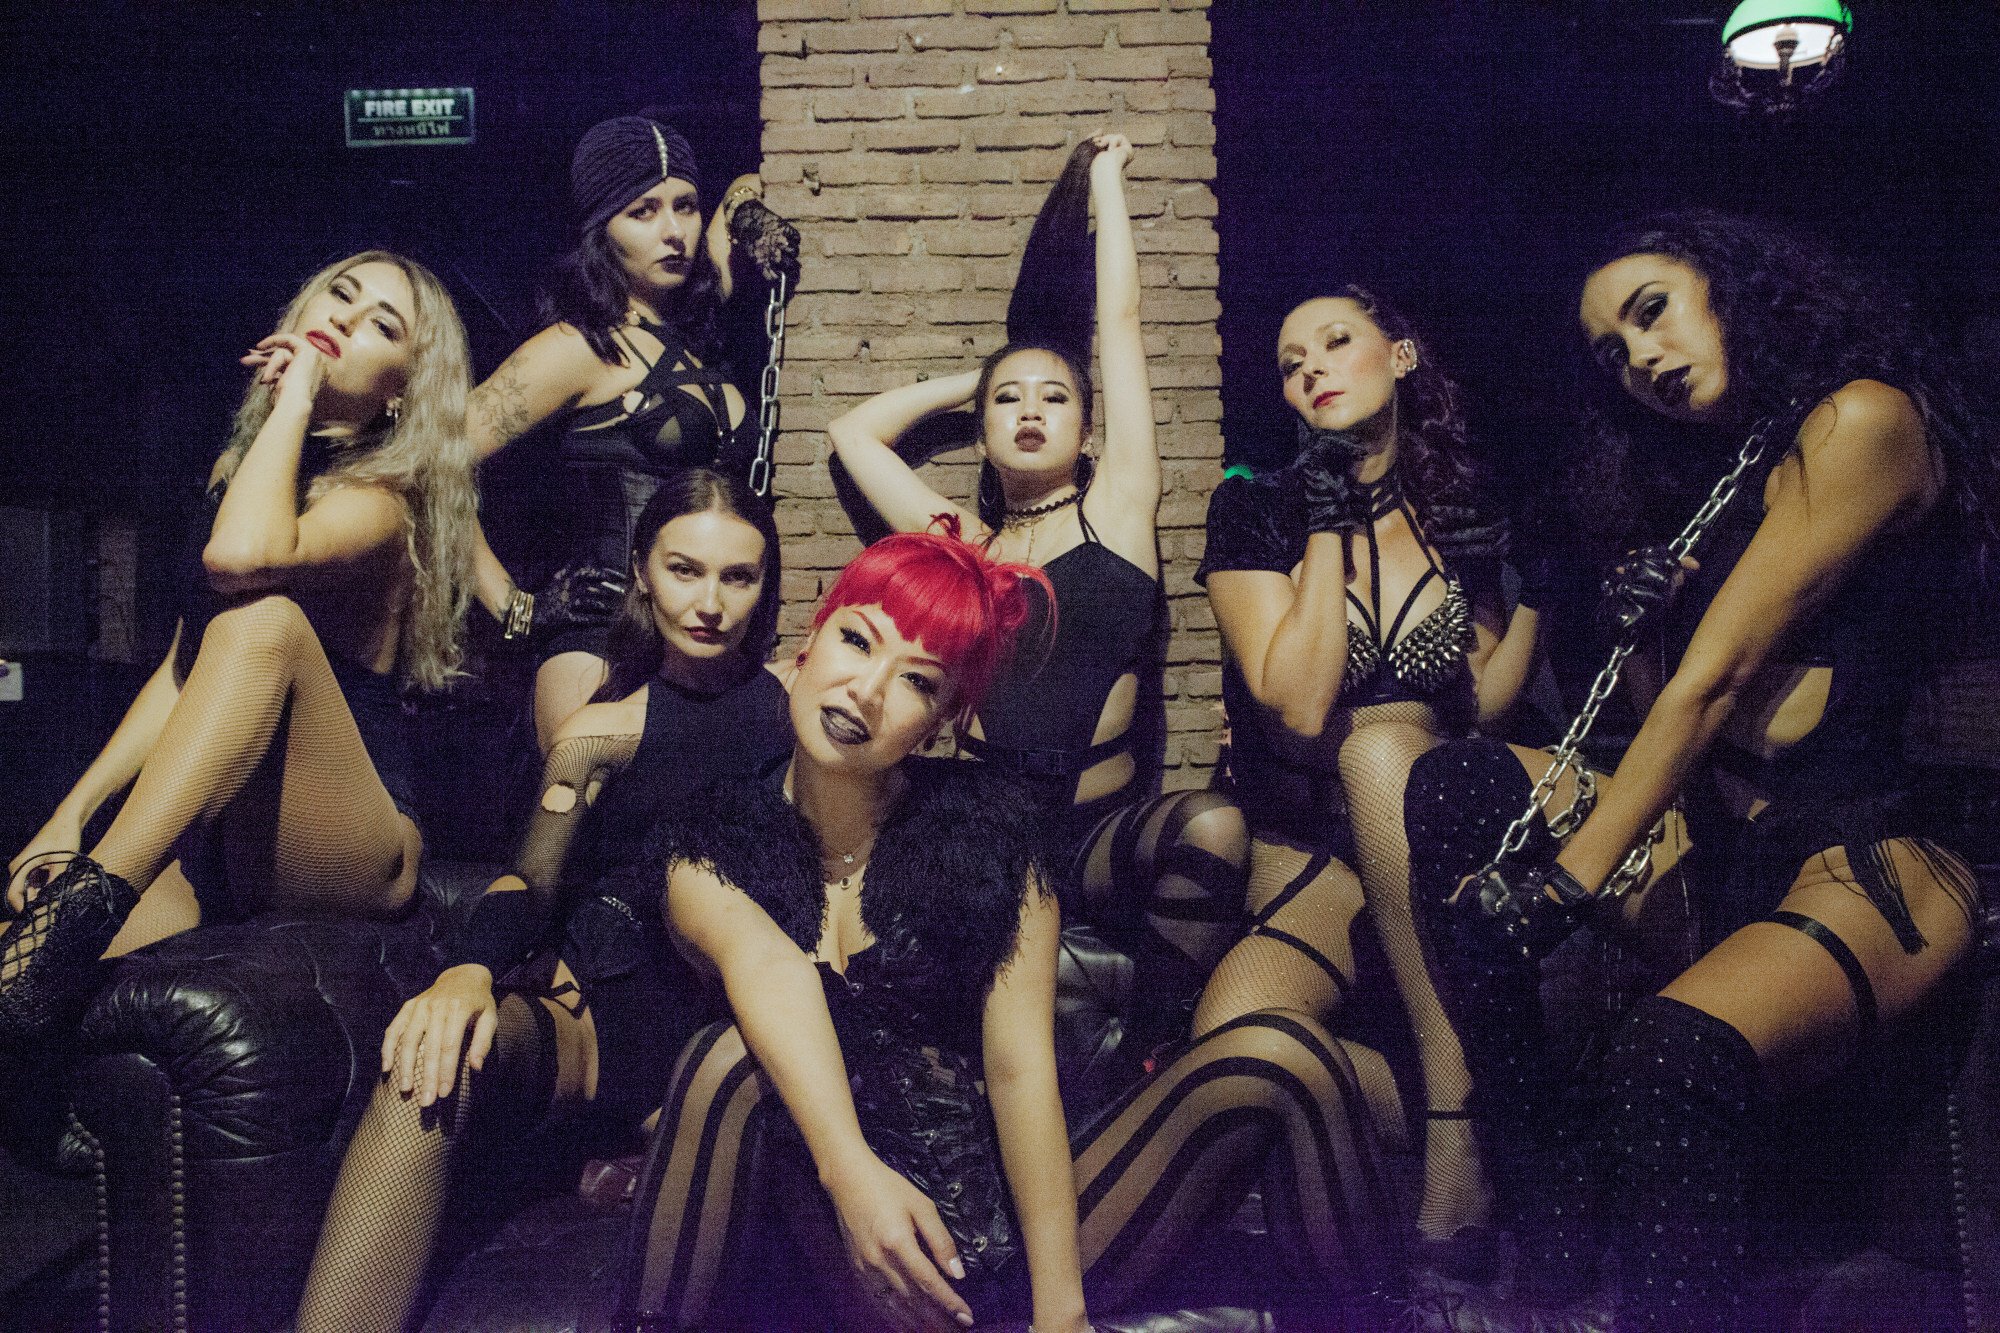 Performers at Madame Rouge’s Burlesque Theatre in Bangkok, Thailand. Photo: Madame Rouge’s Burlesque Theatre